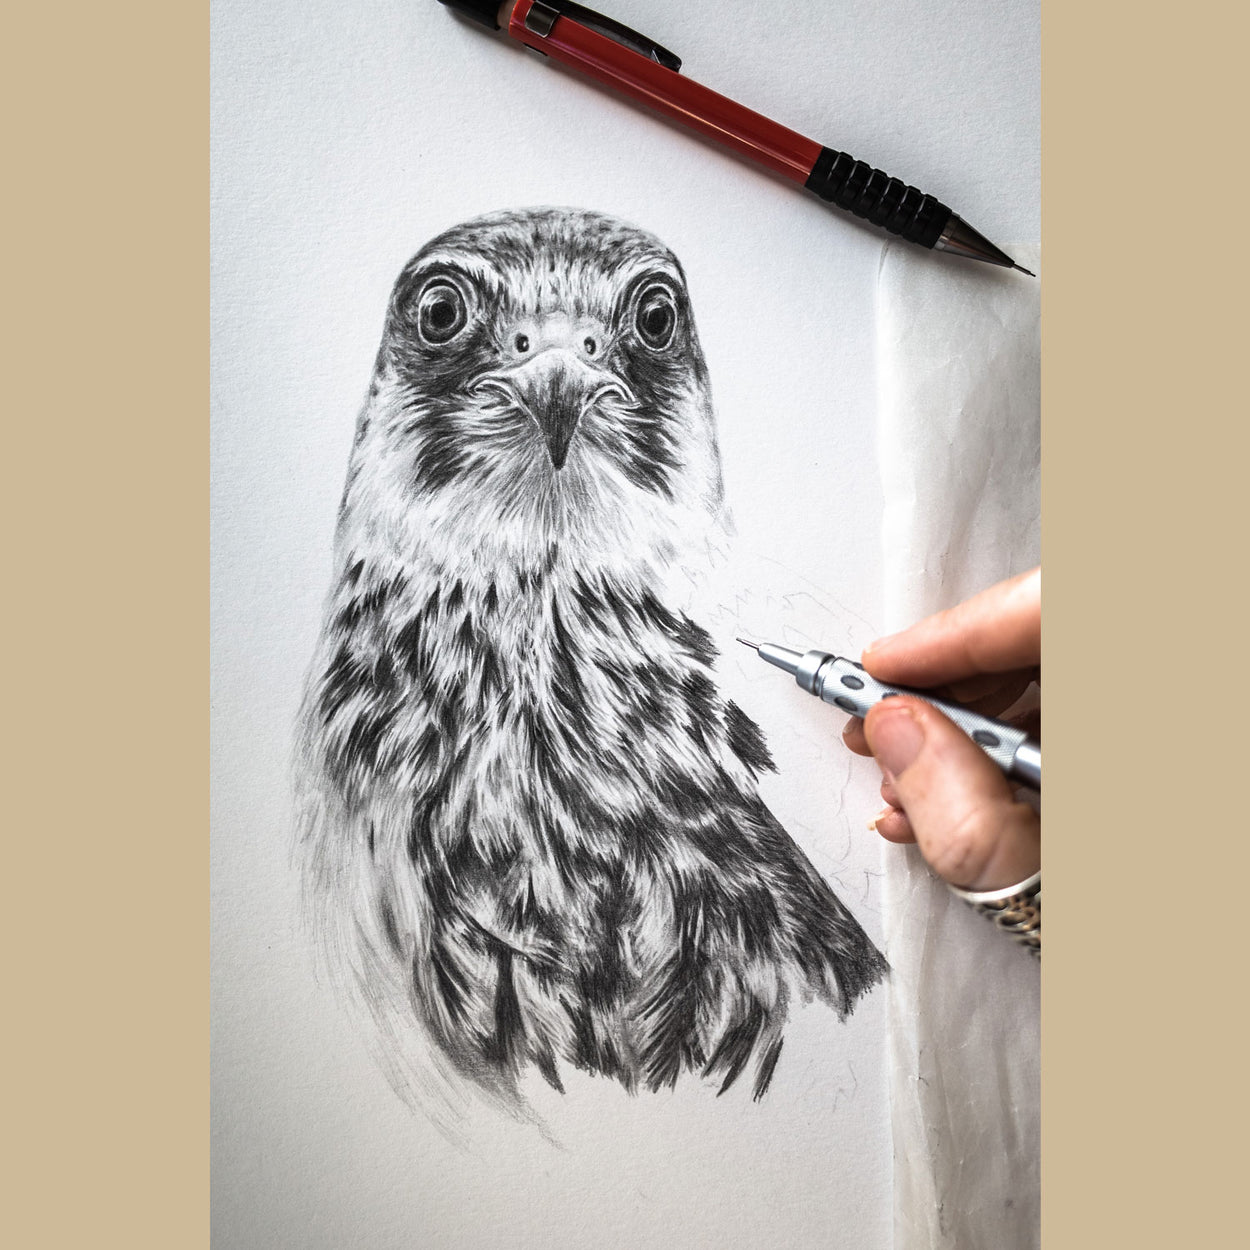 Hobby Pencil Drawing in Progress - The Thriving Wild